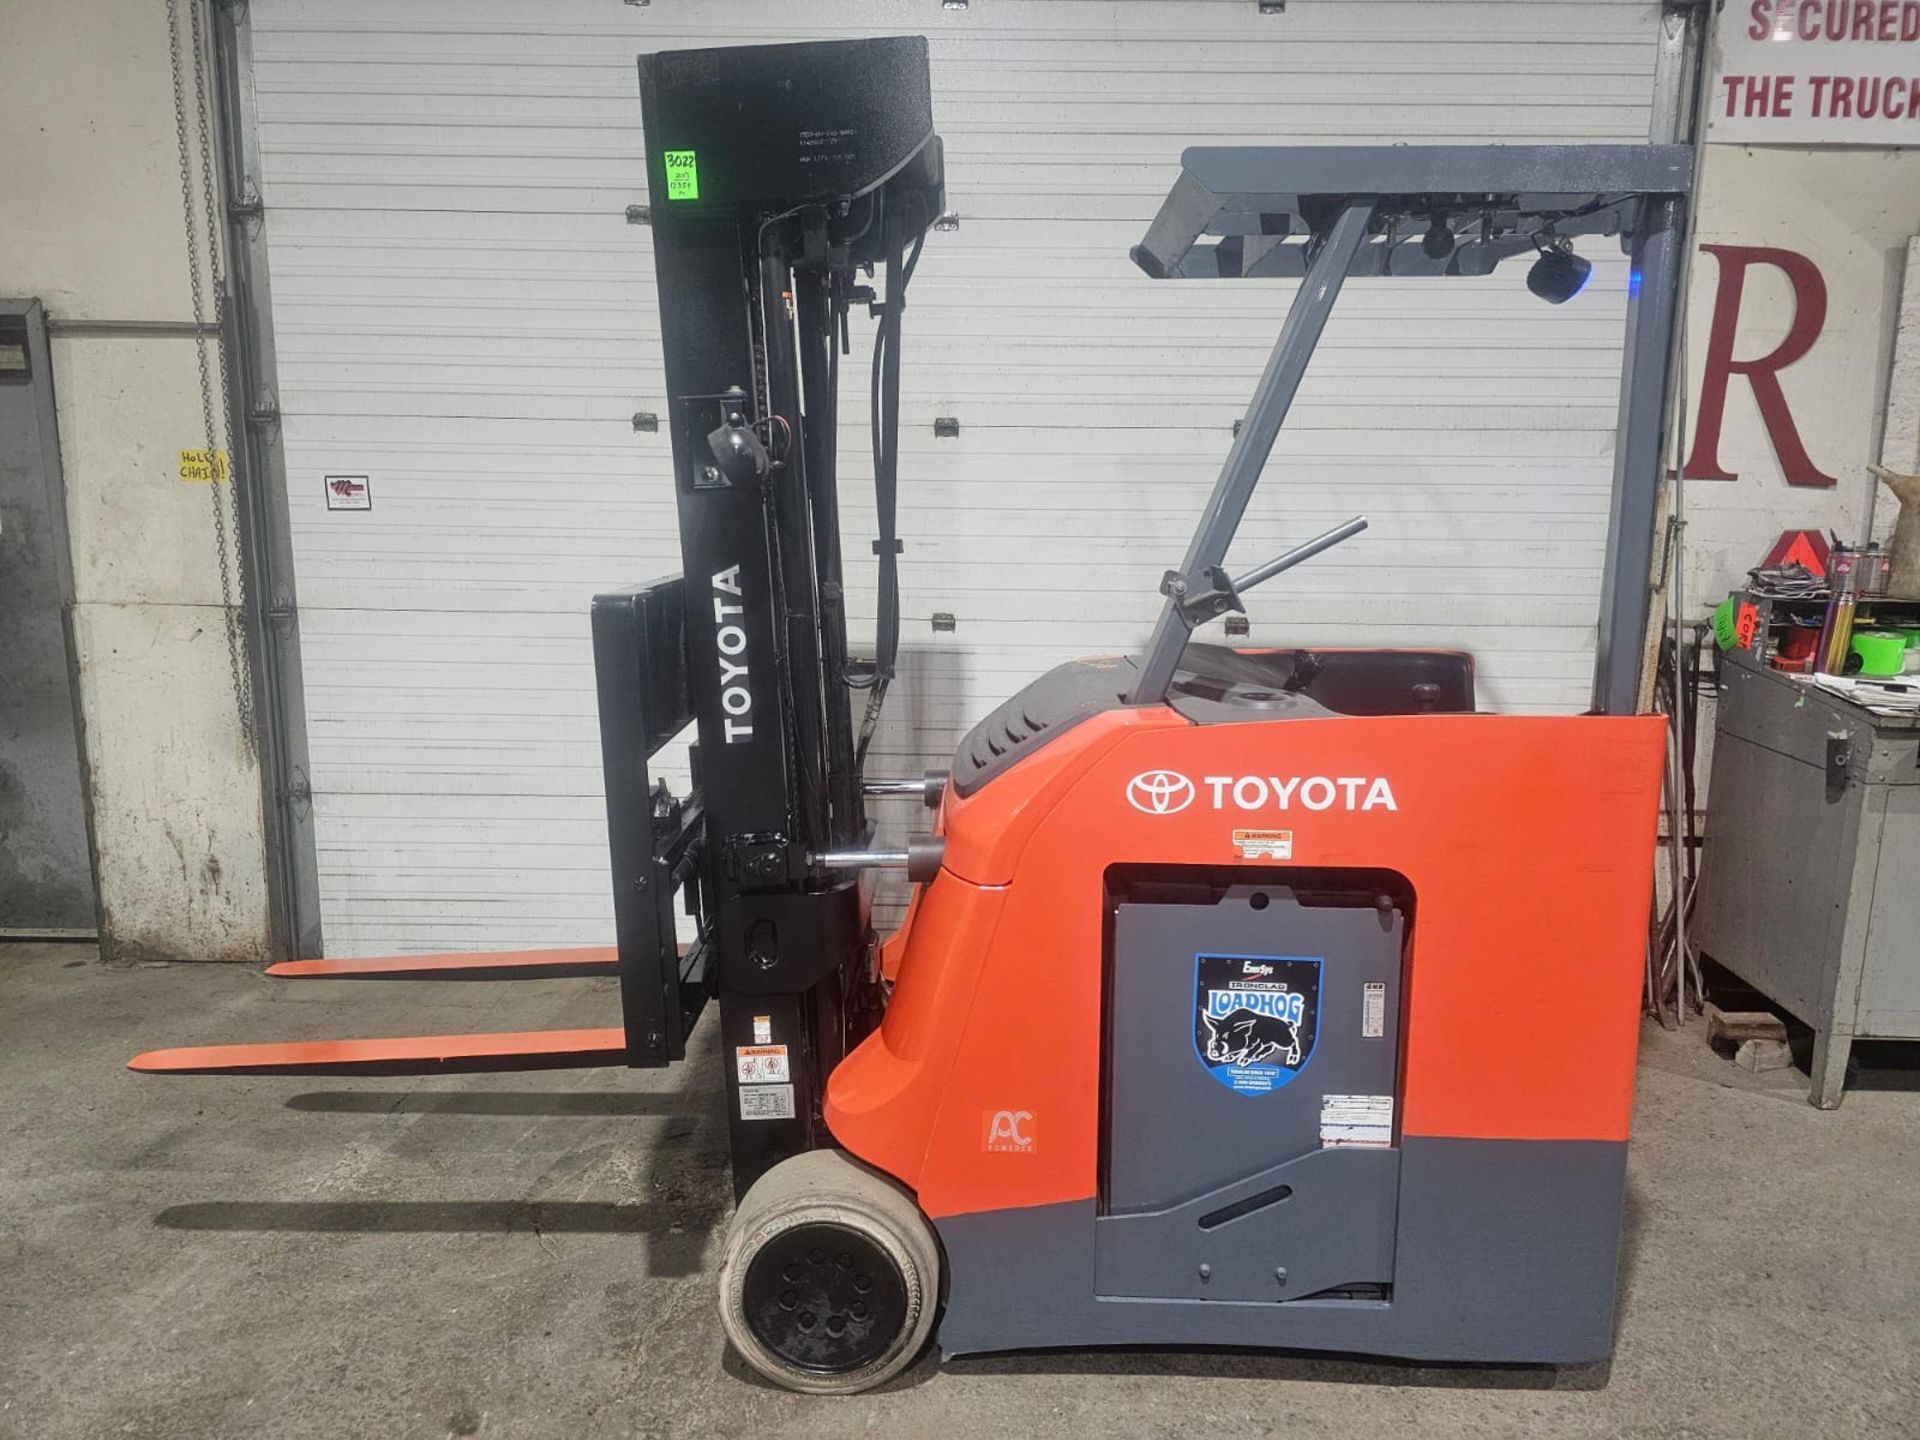 2017 Toyota 4,000lbs Capacity Forklift Electric 36V with sideshift & 4-STAGE MAST 276" max load